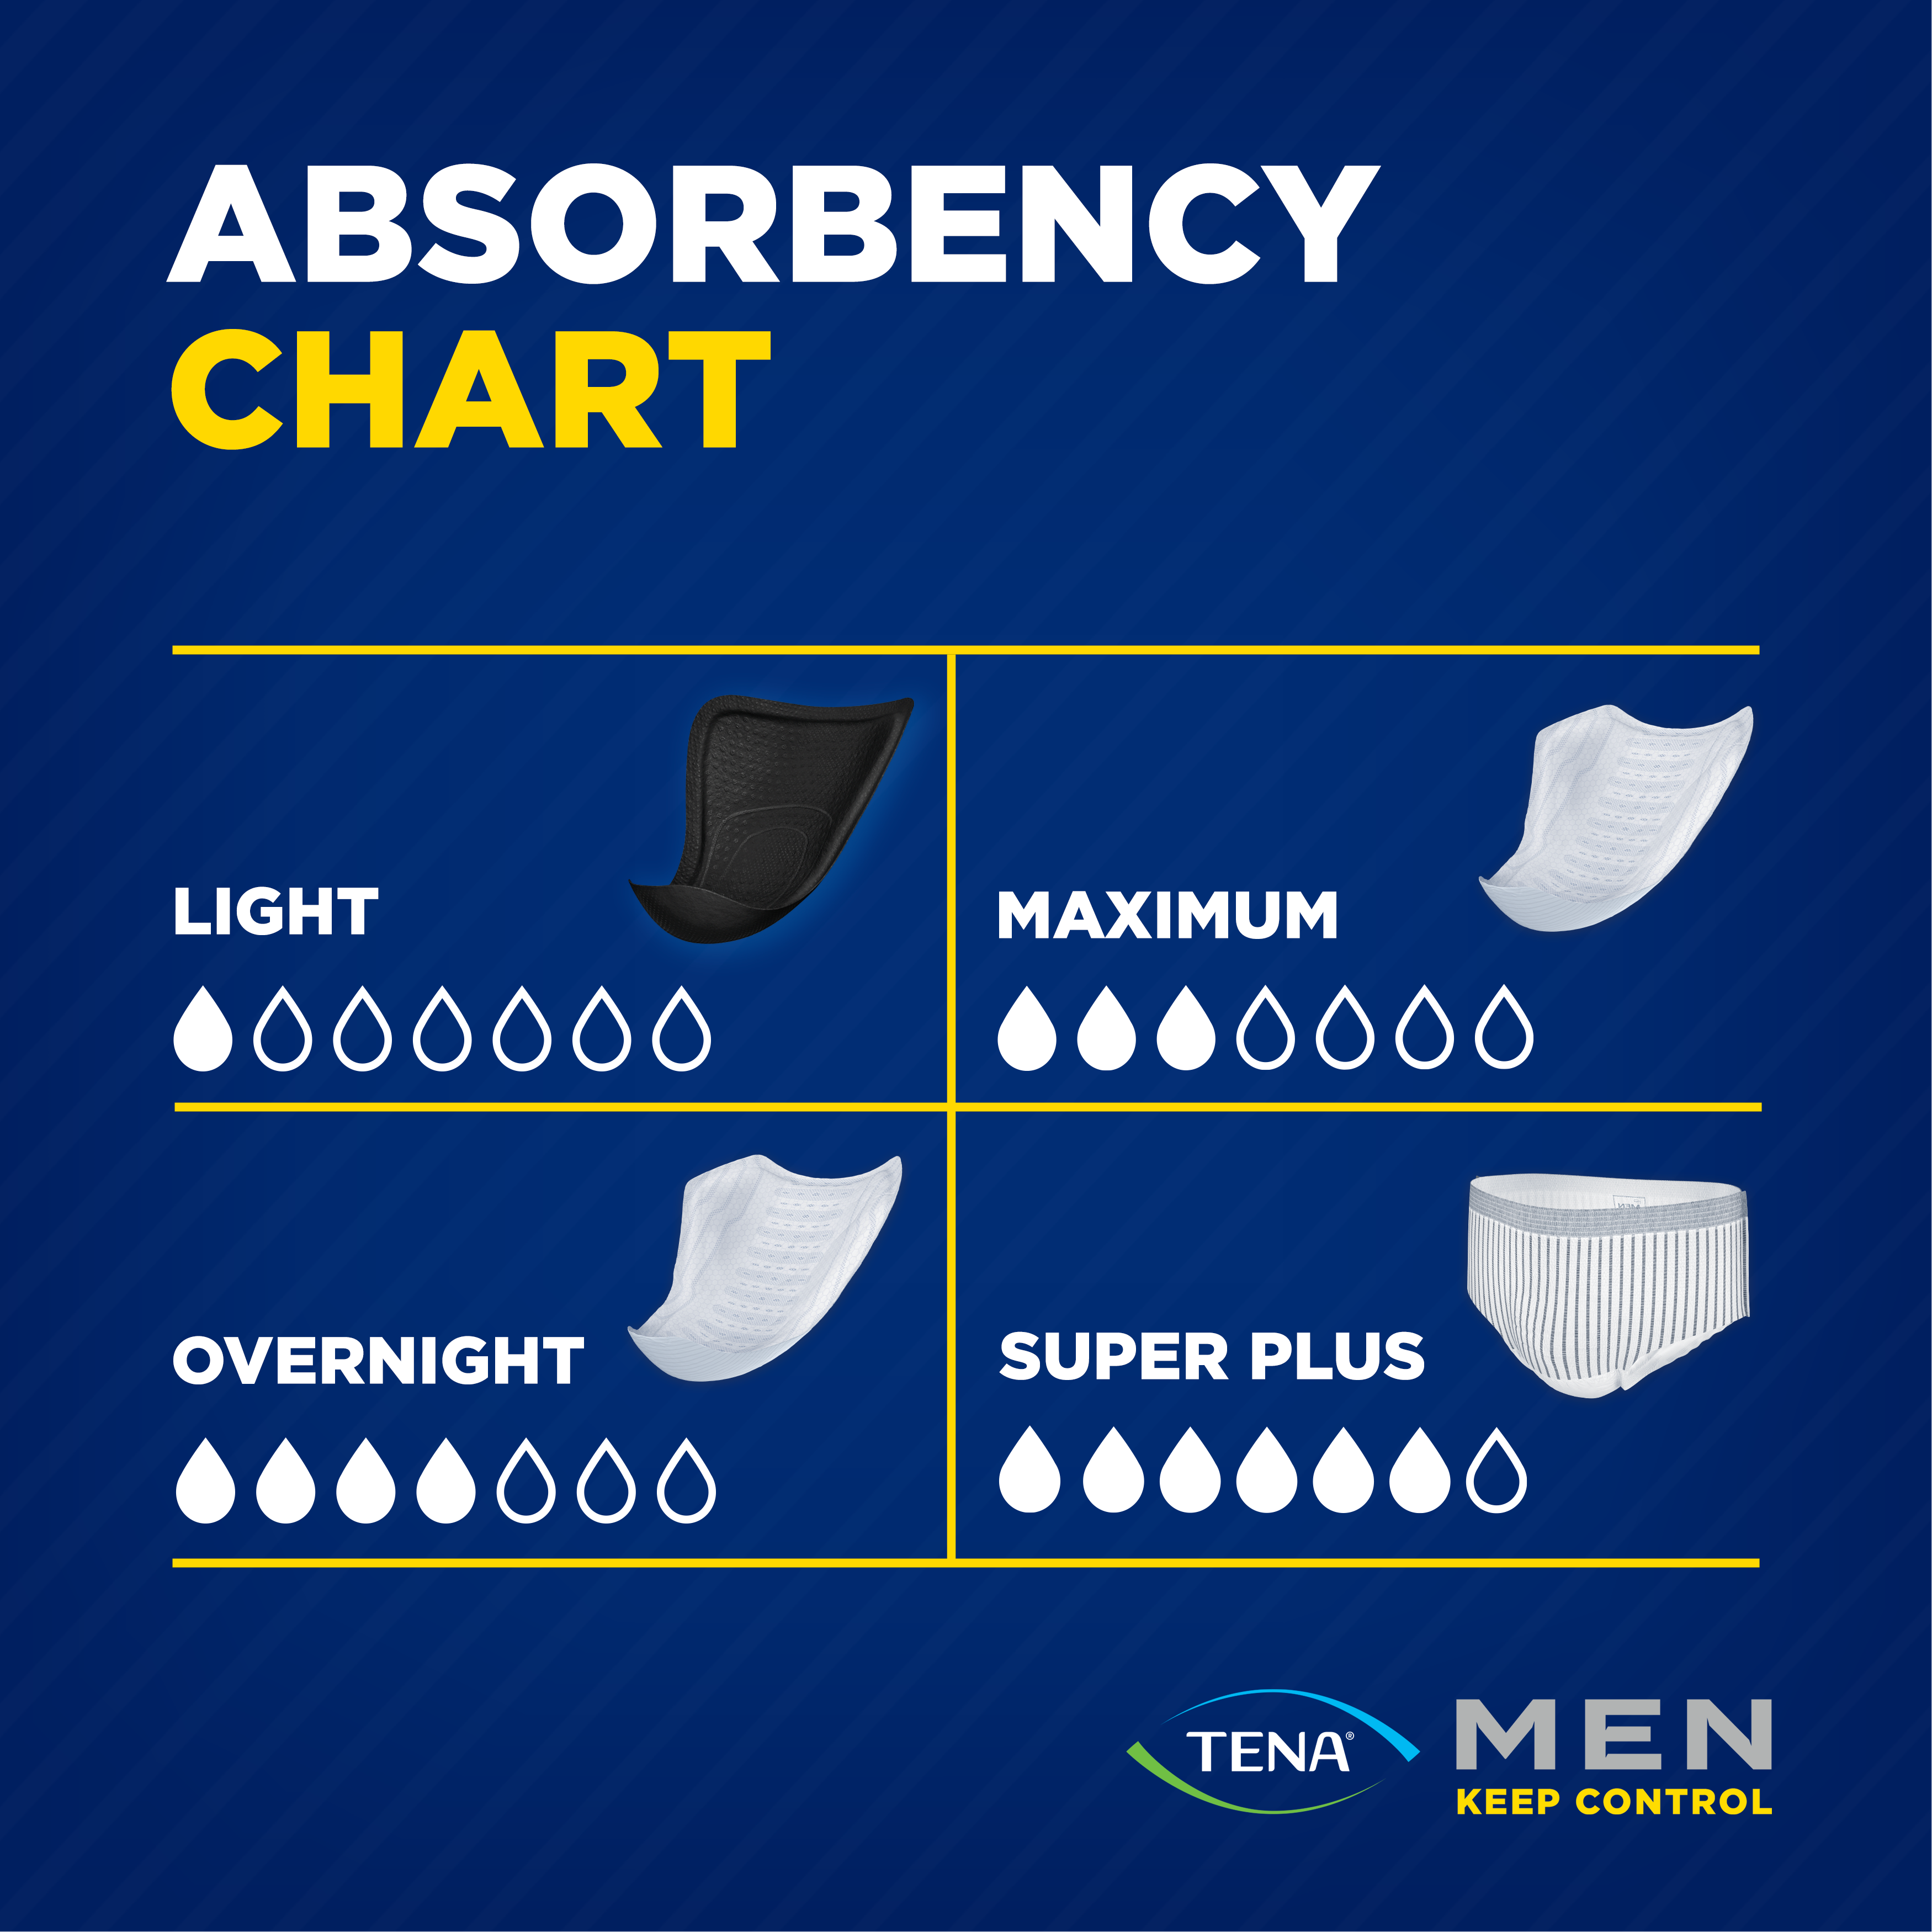 An image of an absorbency chart with Overnight guards with four our of seven drops